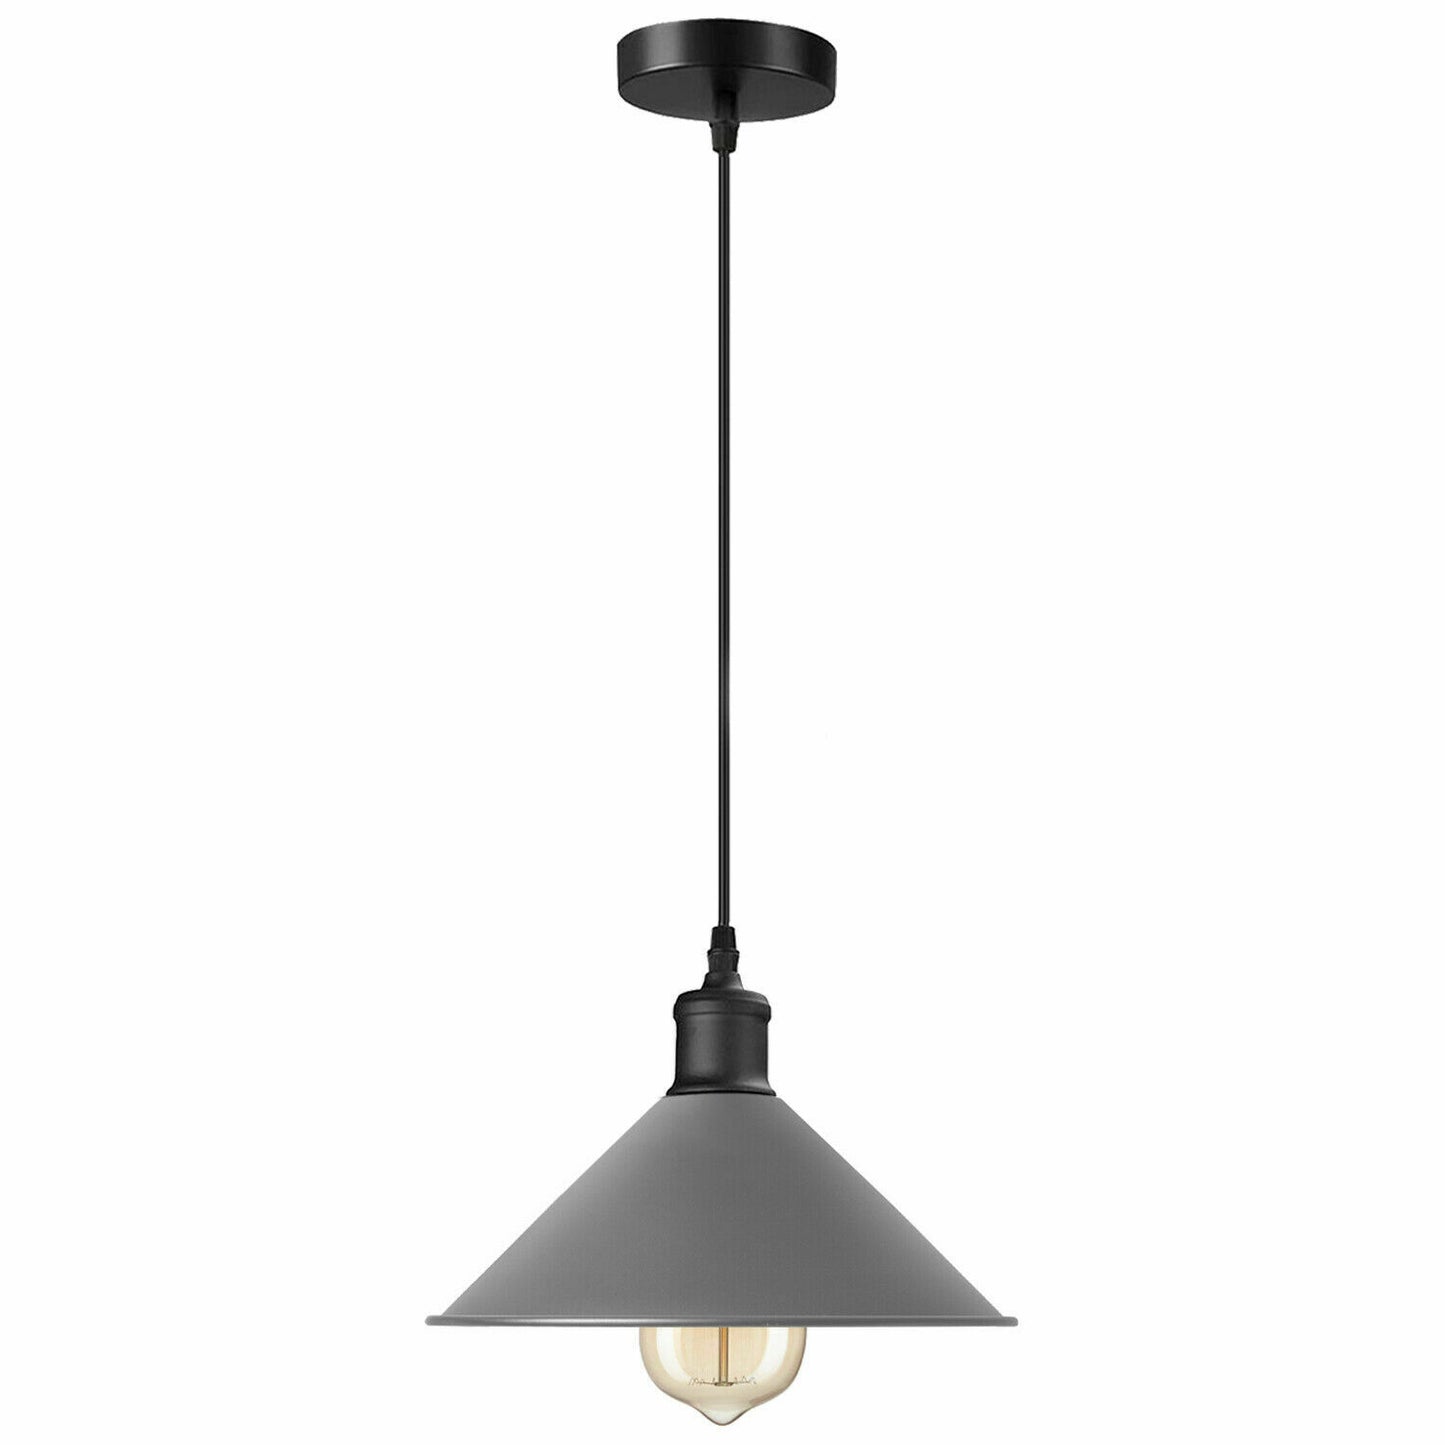 21 Inch Industrial Modern Cone Ceiling Pendant Lighting